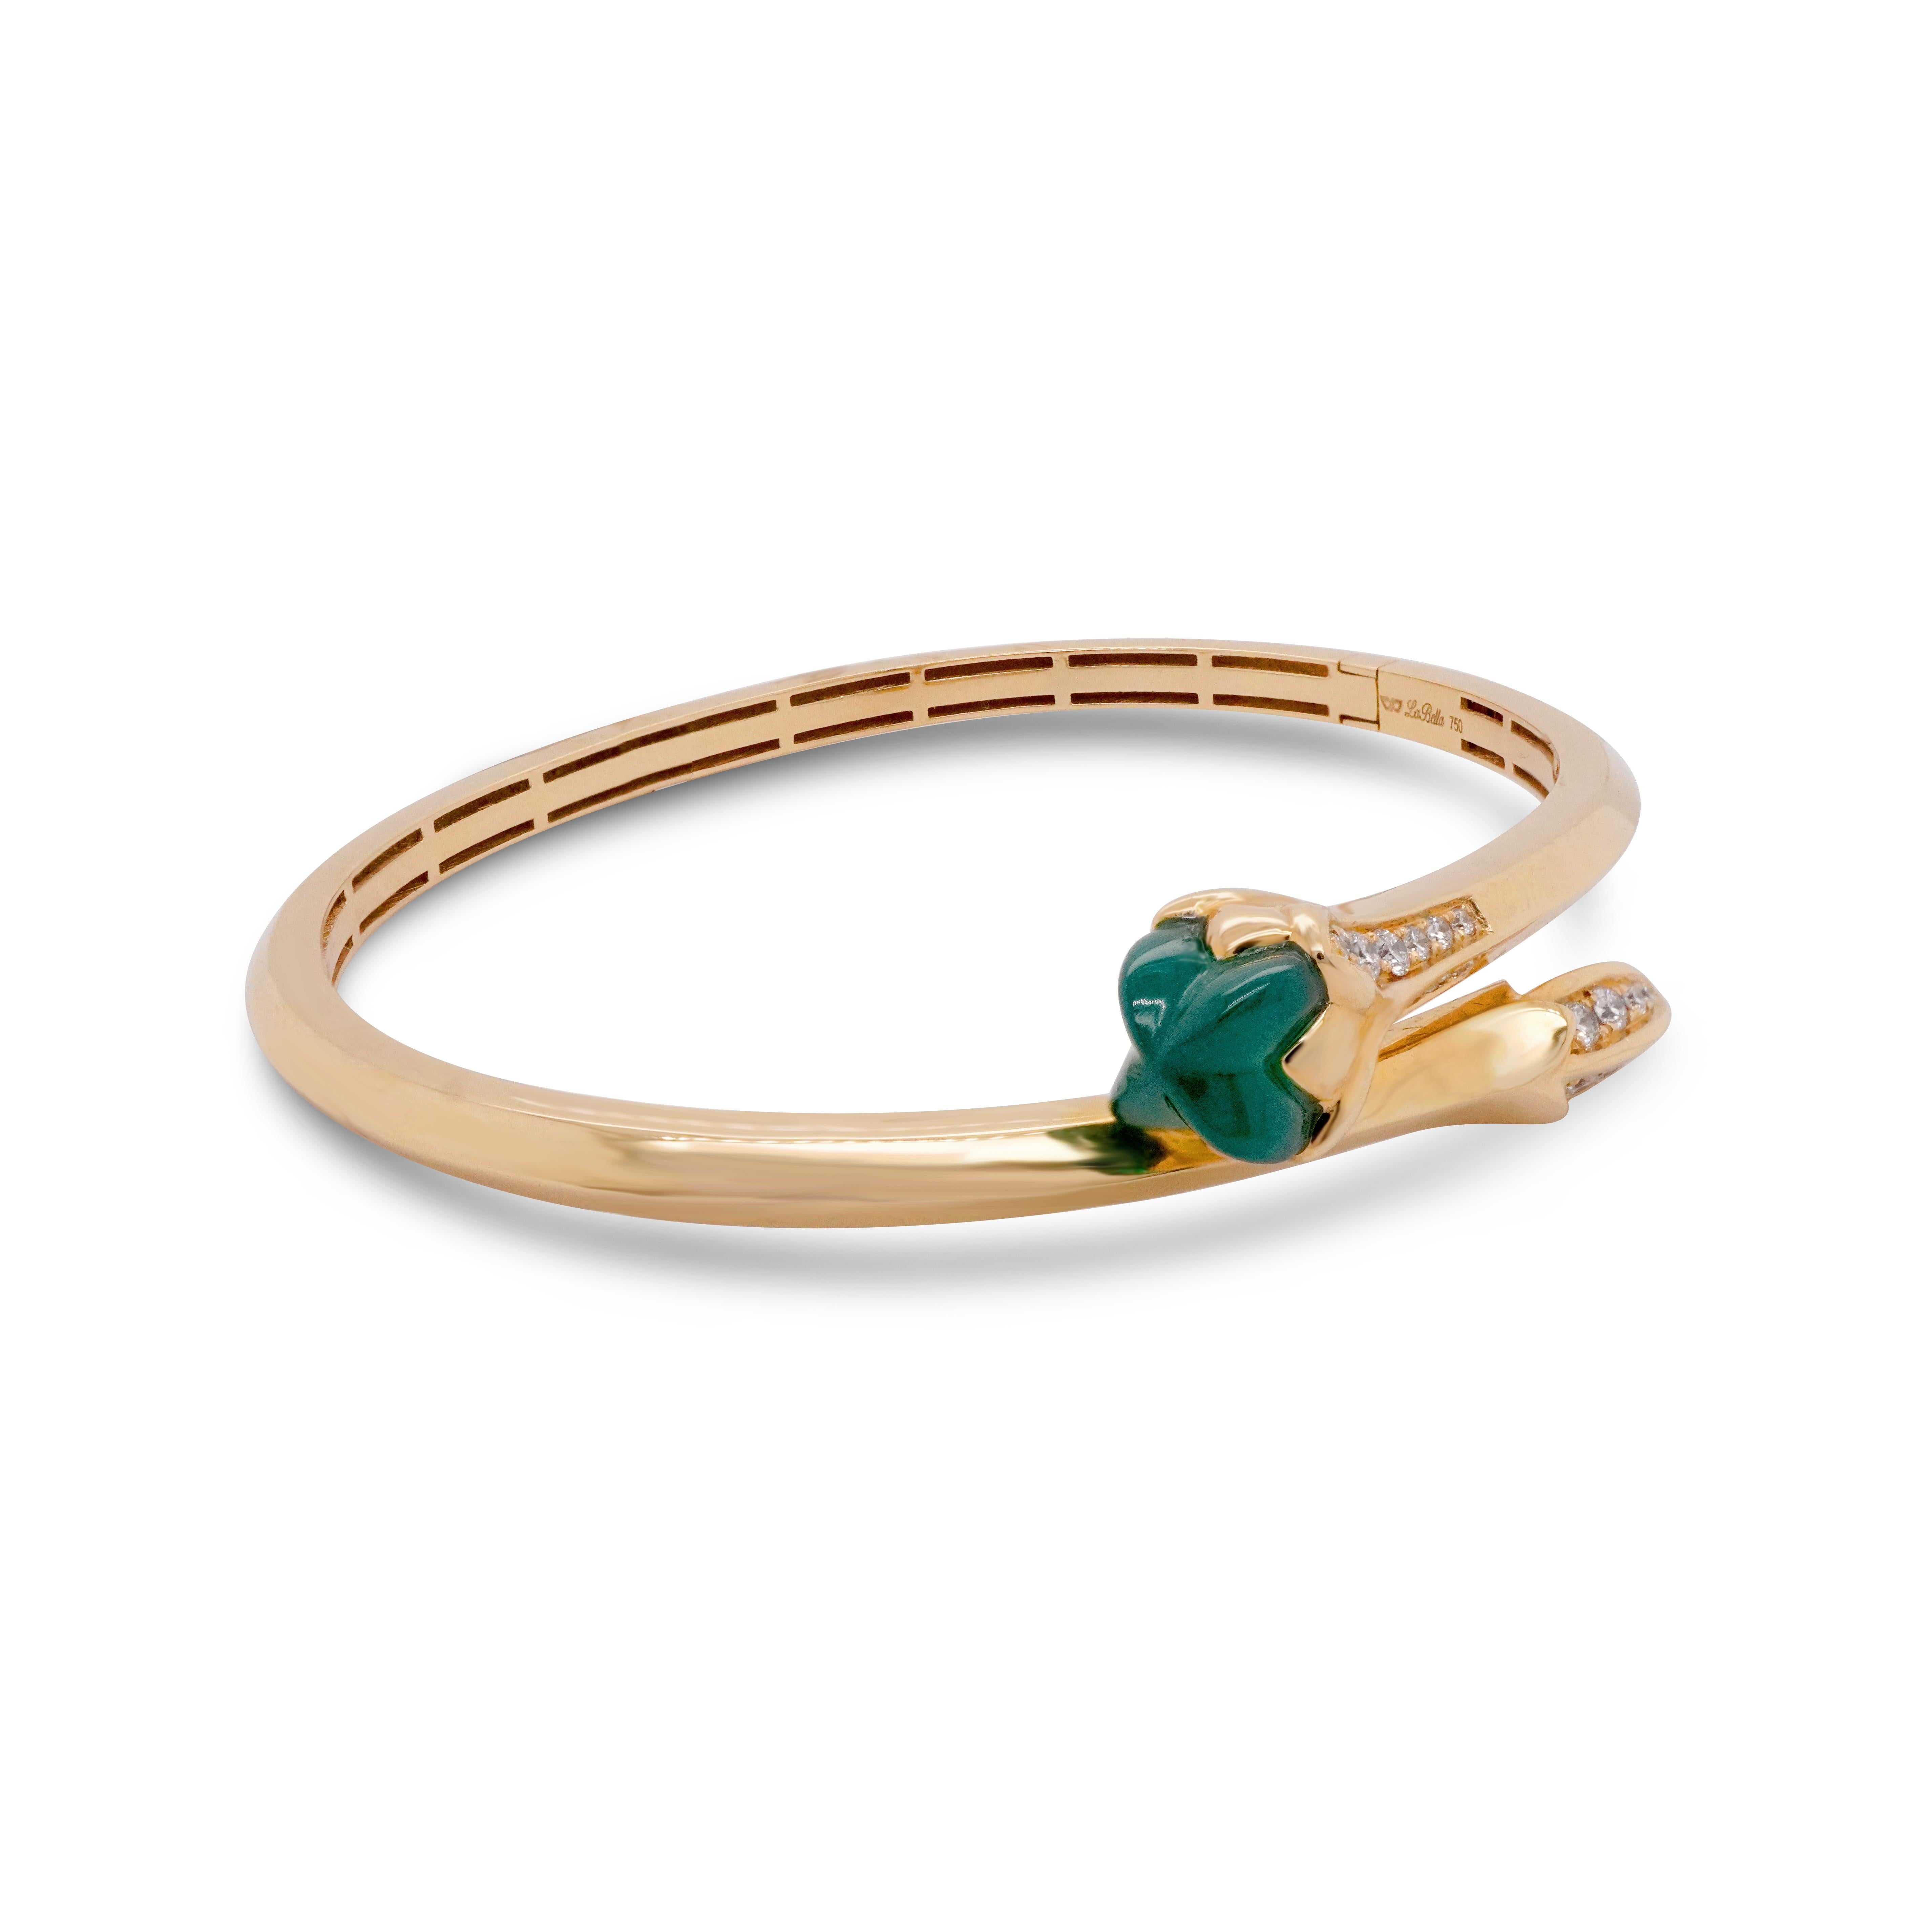 18K Yellow Gold Retro Style Diamond Bangle

18K Gold - 17.68 GM
22 Diamonds - 0.42 CT
1 Jade - 0.36 GM

When Jade meets 18K Gold bangle with all of the shining round diamonds, it brings you an elegant look and you will definitely become the